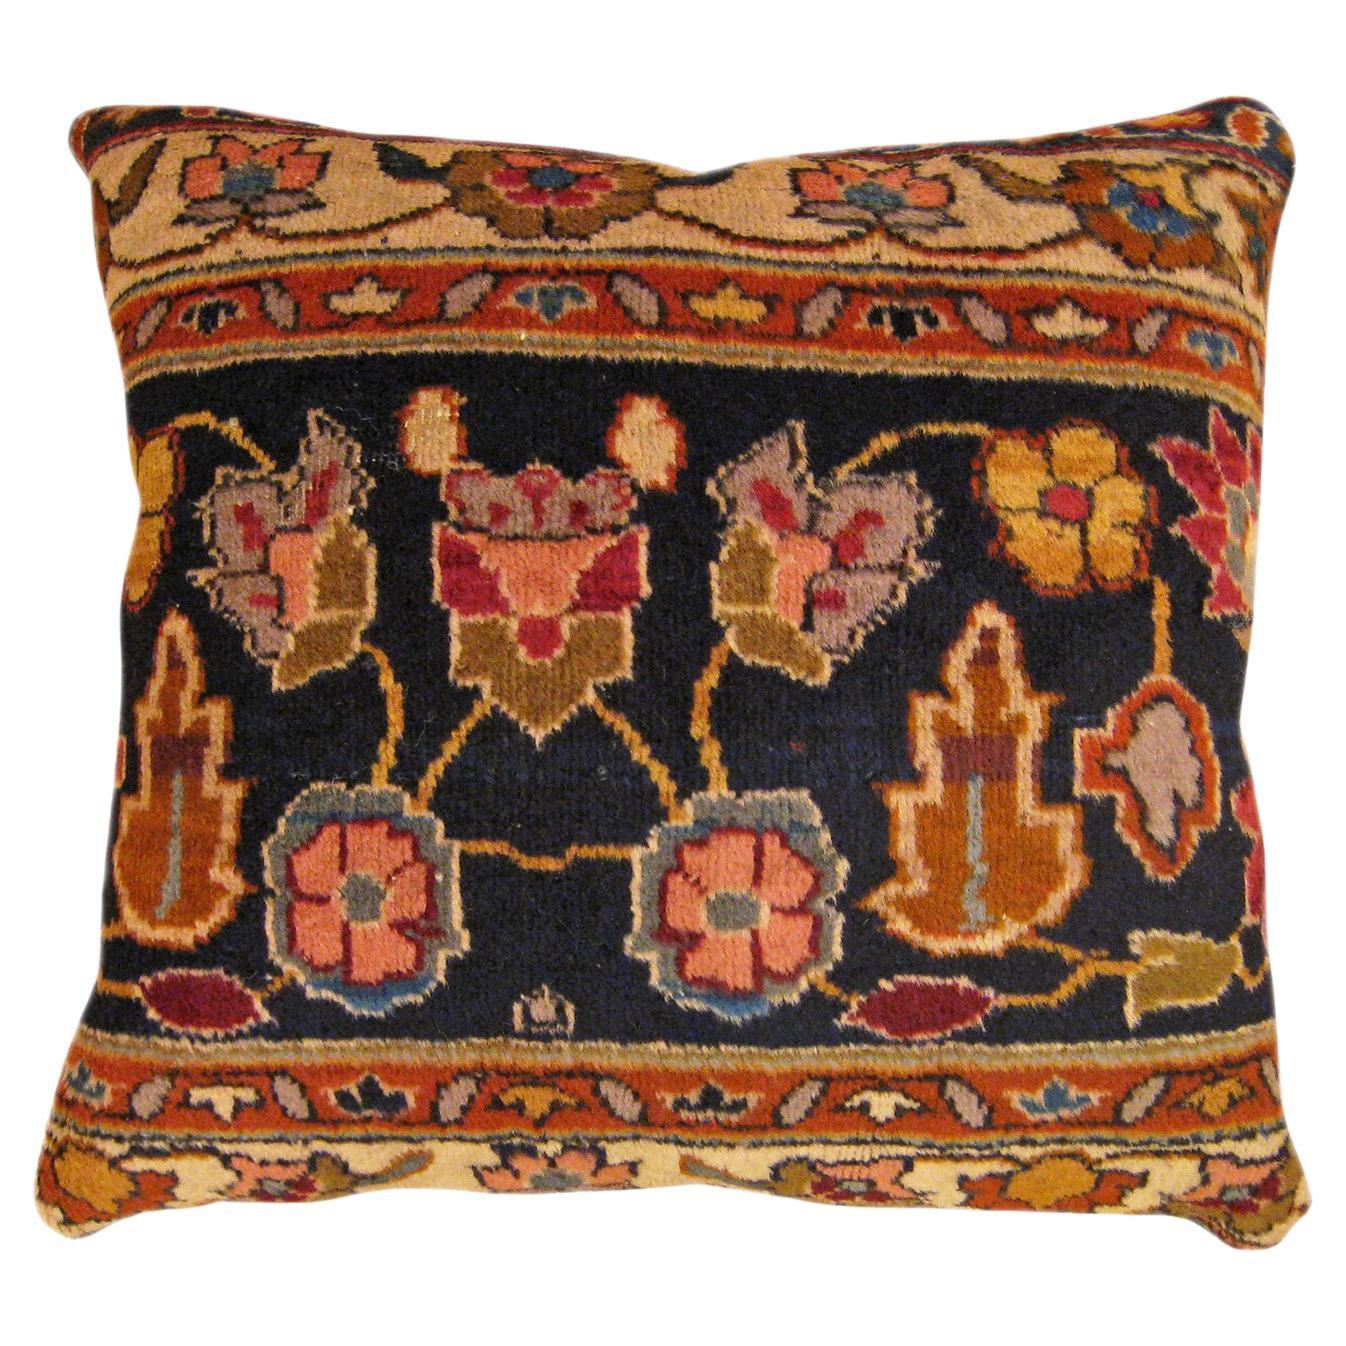 Decorative Antique Indian Agra Rug Pillow with Floral Elements Allover For Sale